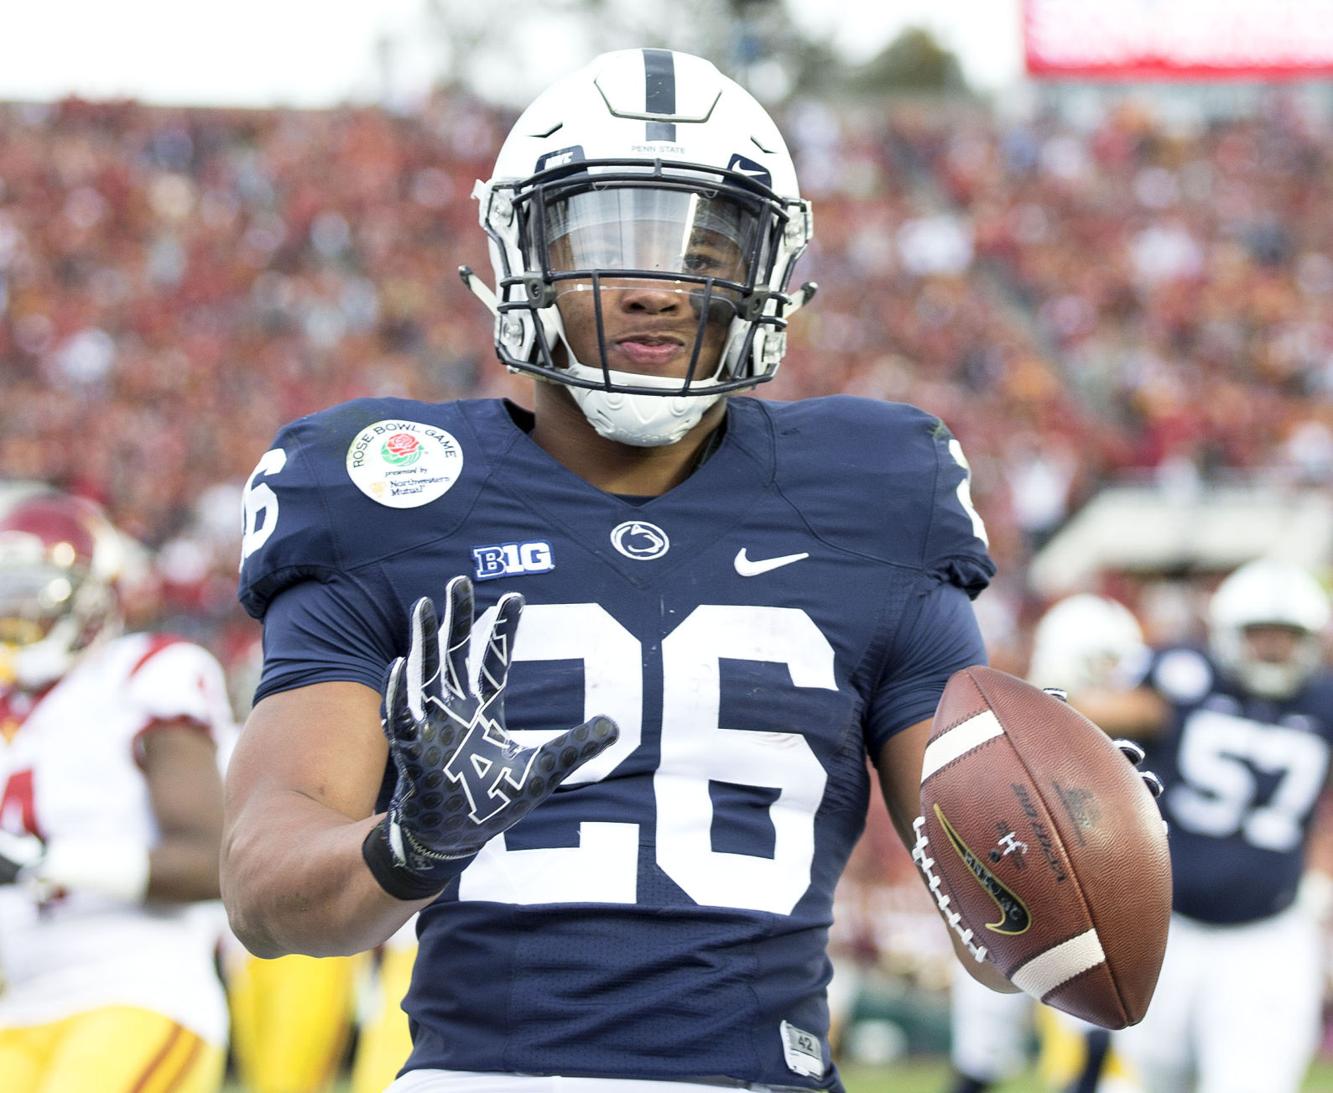 Three Penn State football players make Sports Illustrated's top100